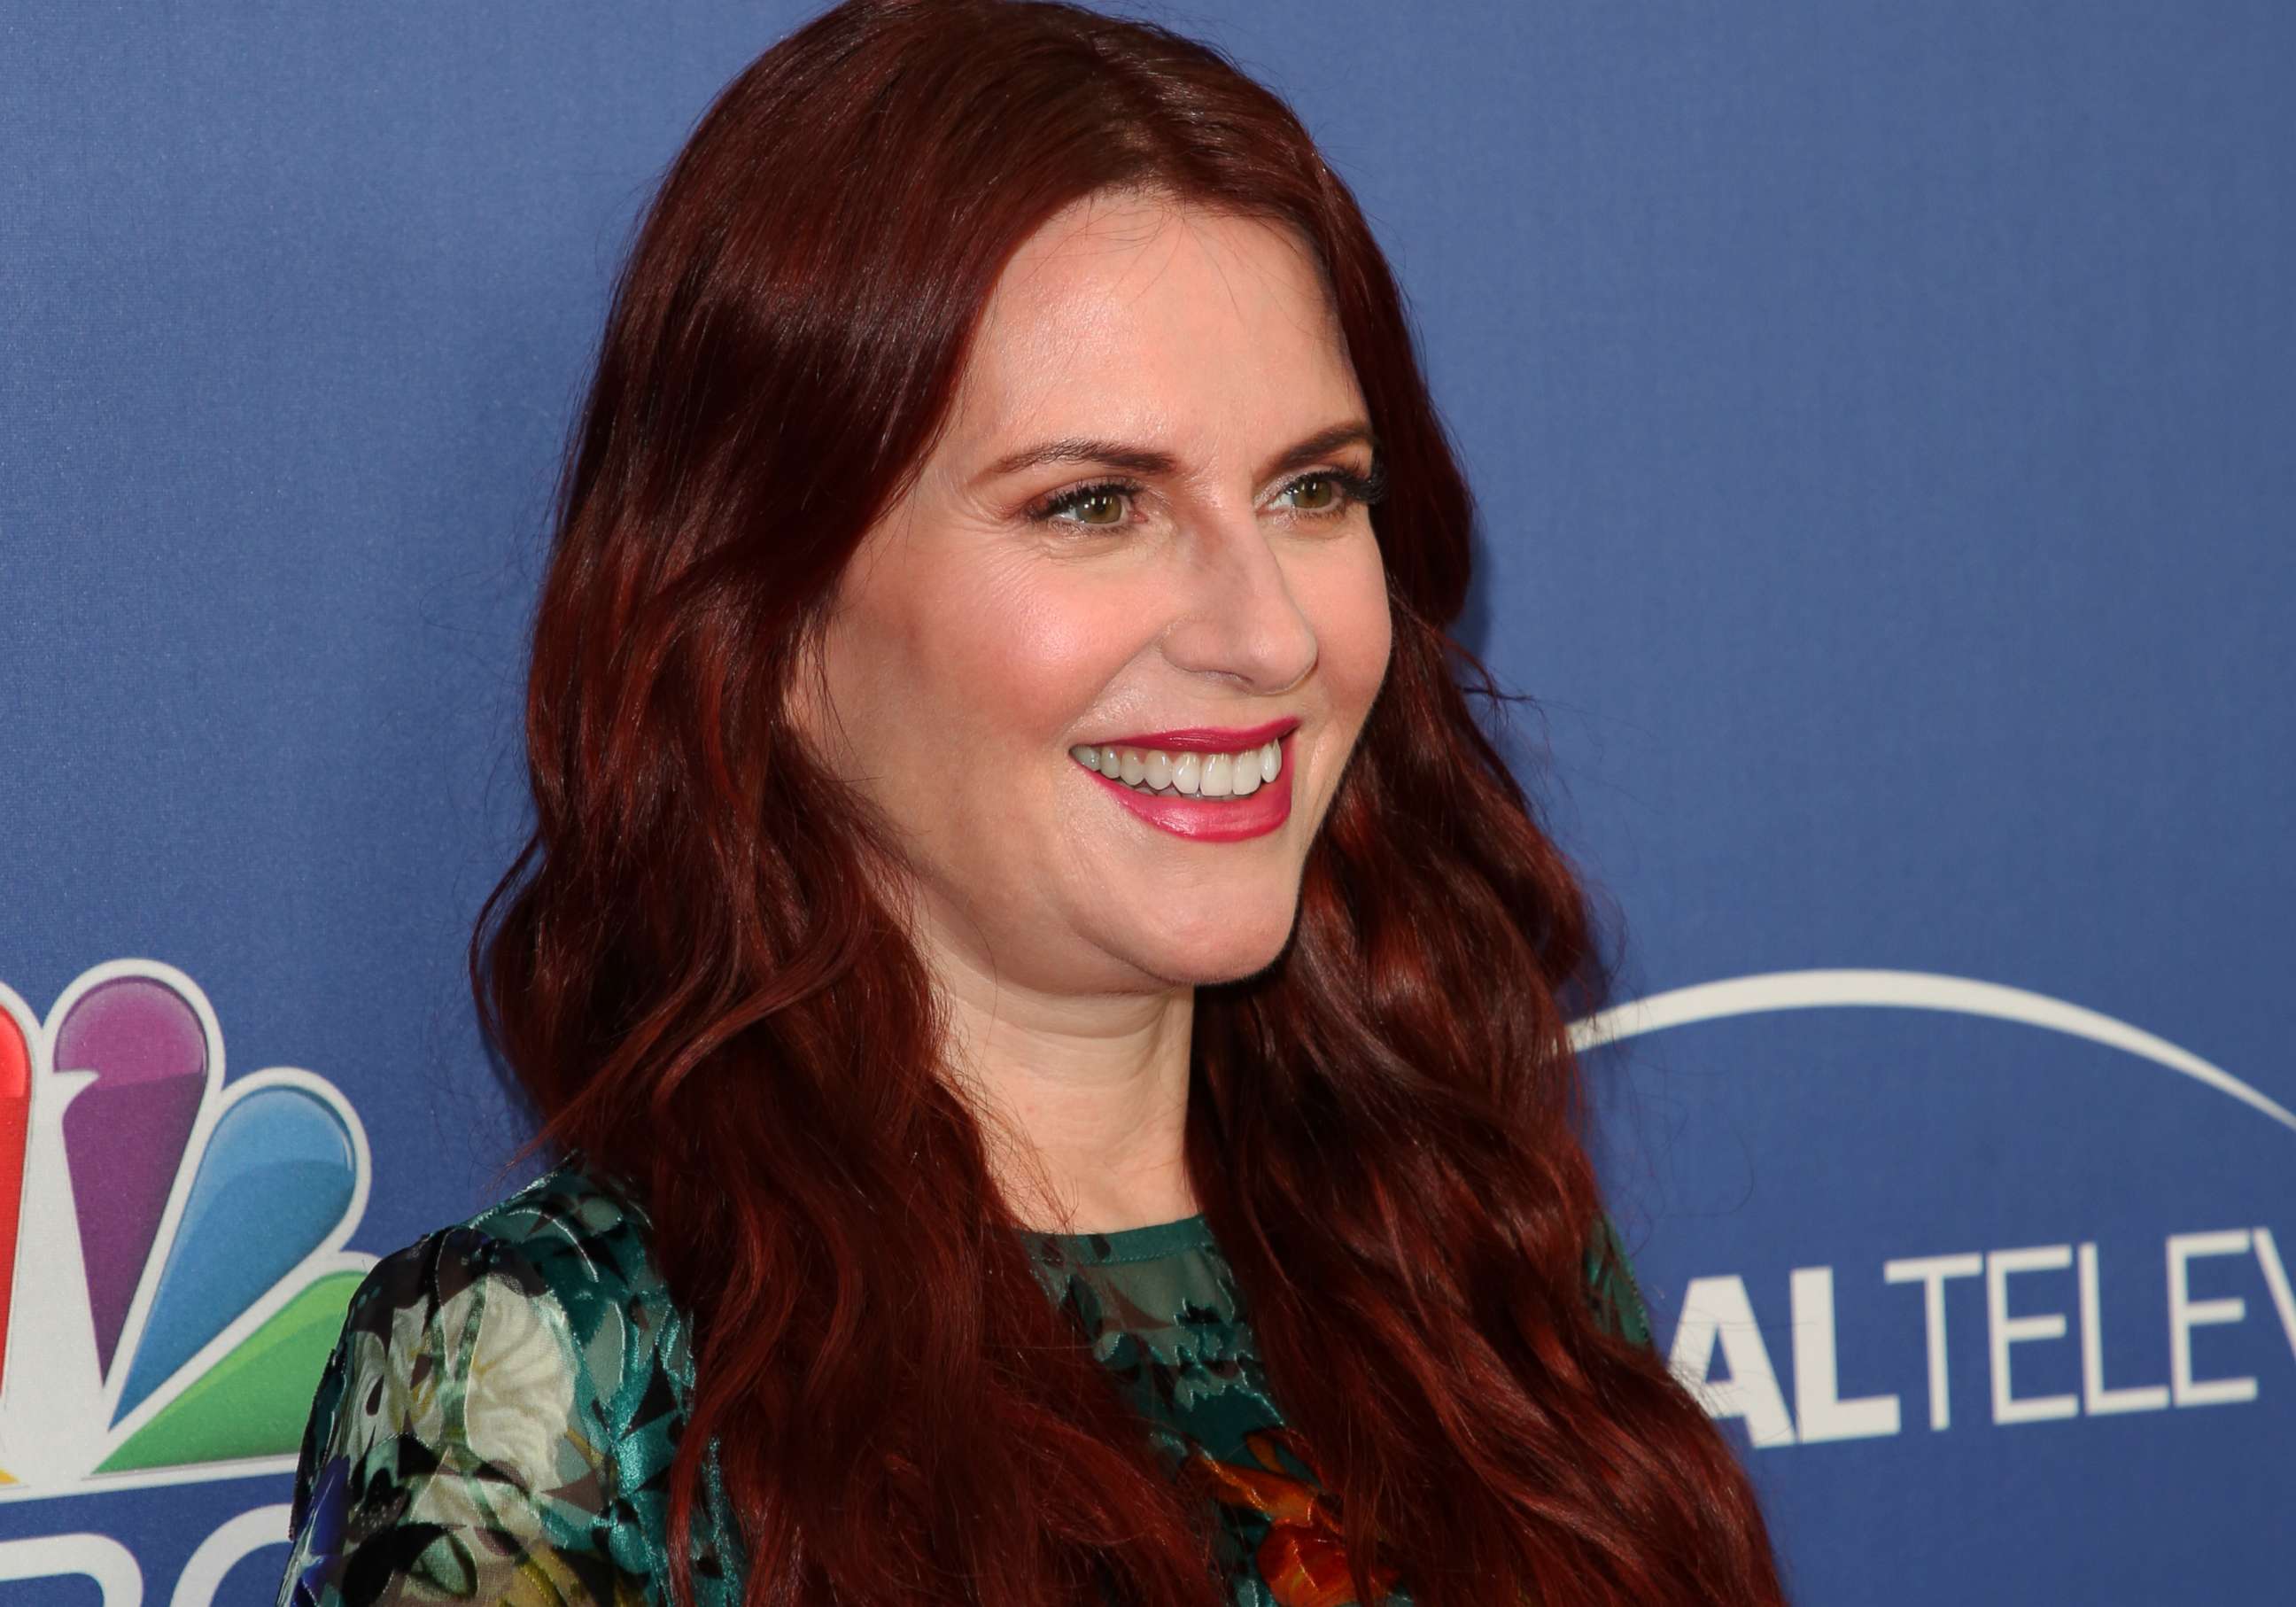 PHOTO: Megan Mullally attends NBC's "Will & Grace" FYC event on June 9, 2018, in Los Angeles.